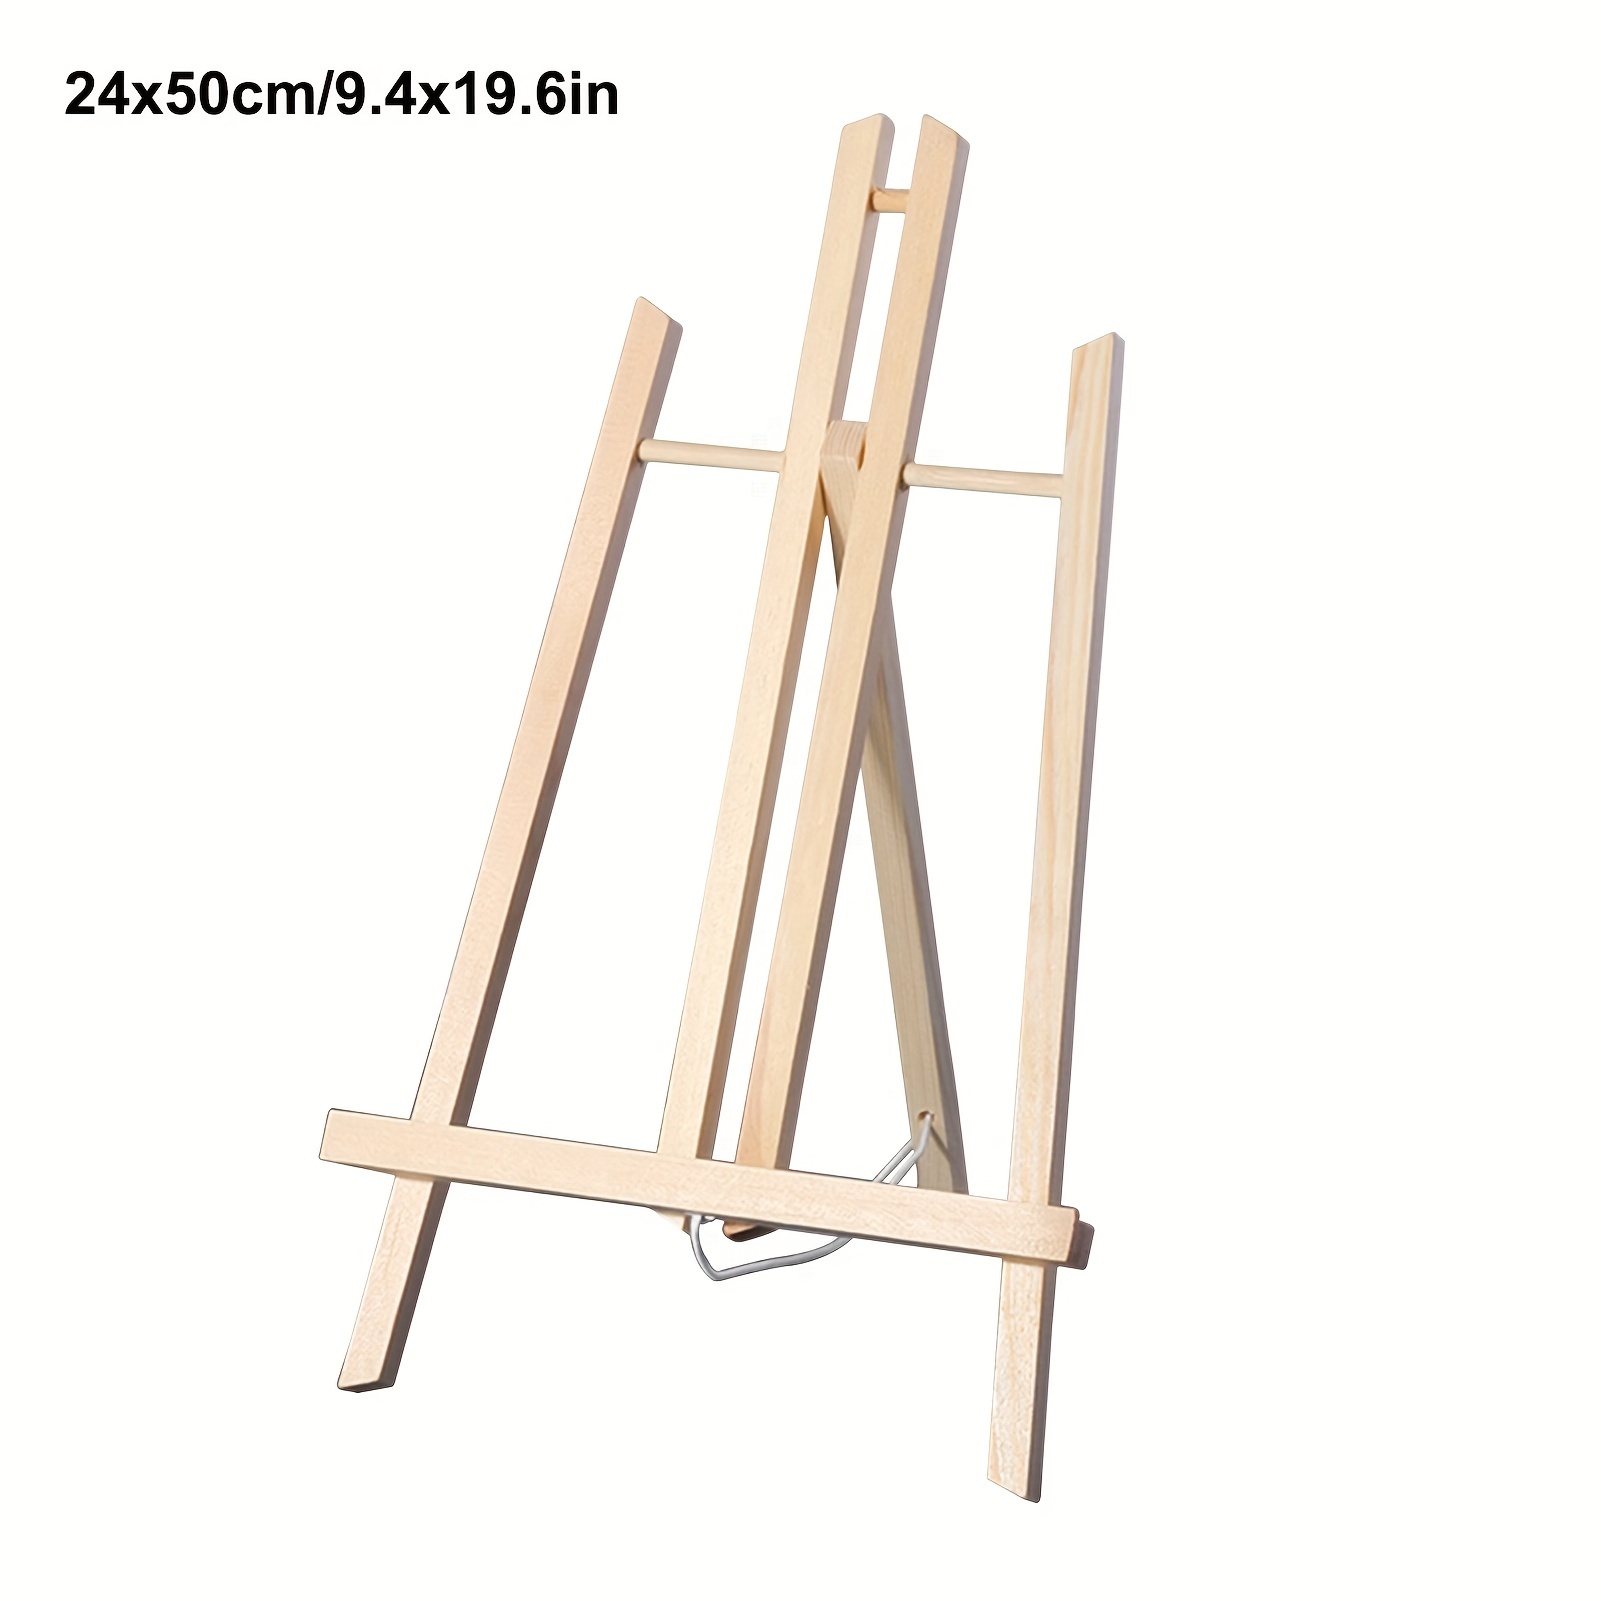 Plate Stand Medium Size 23cm Wooden Folding Easel for Pictures & Displays